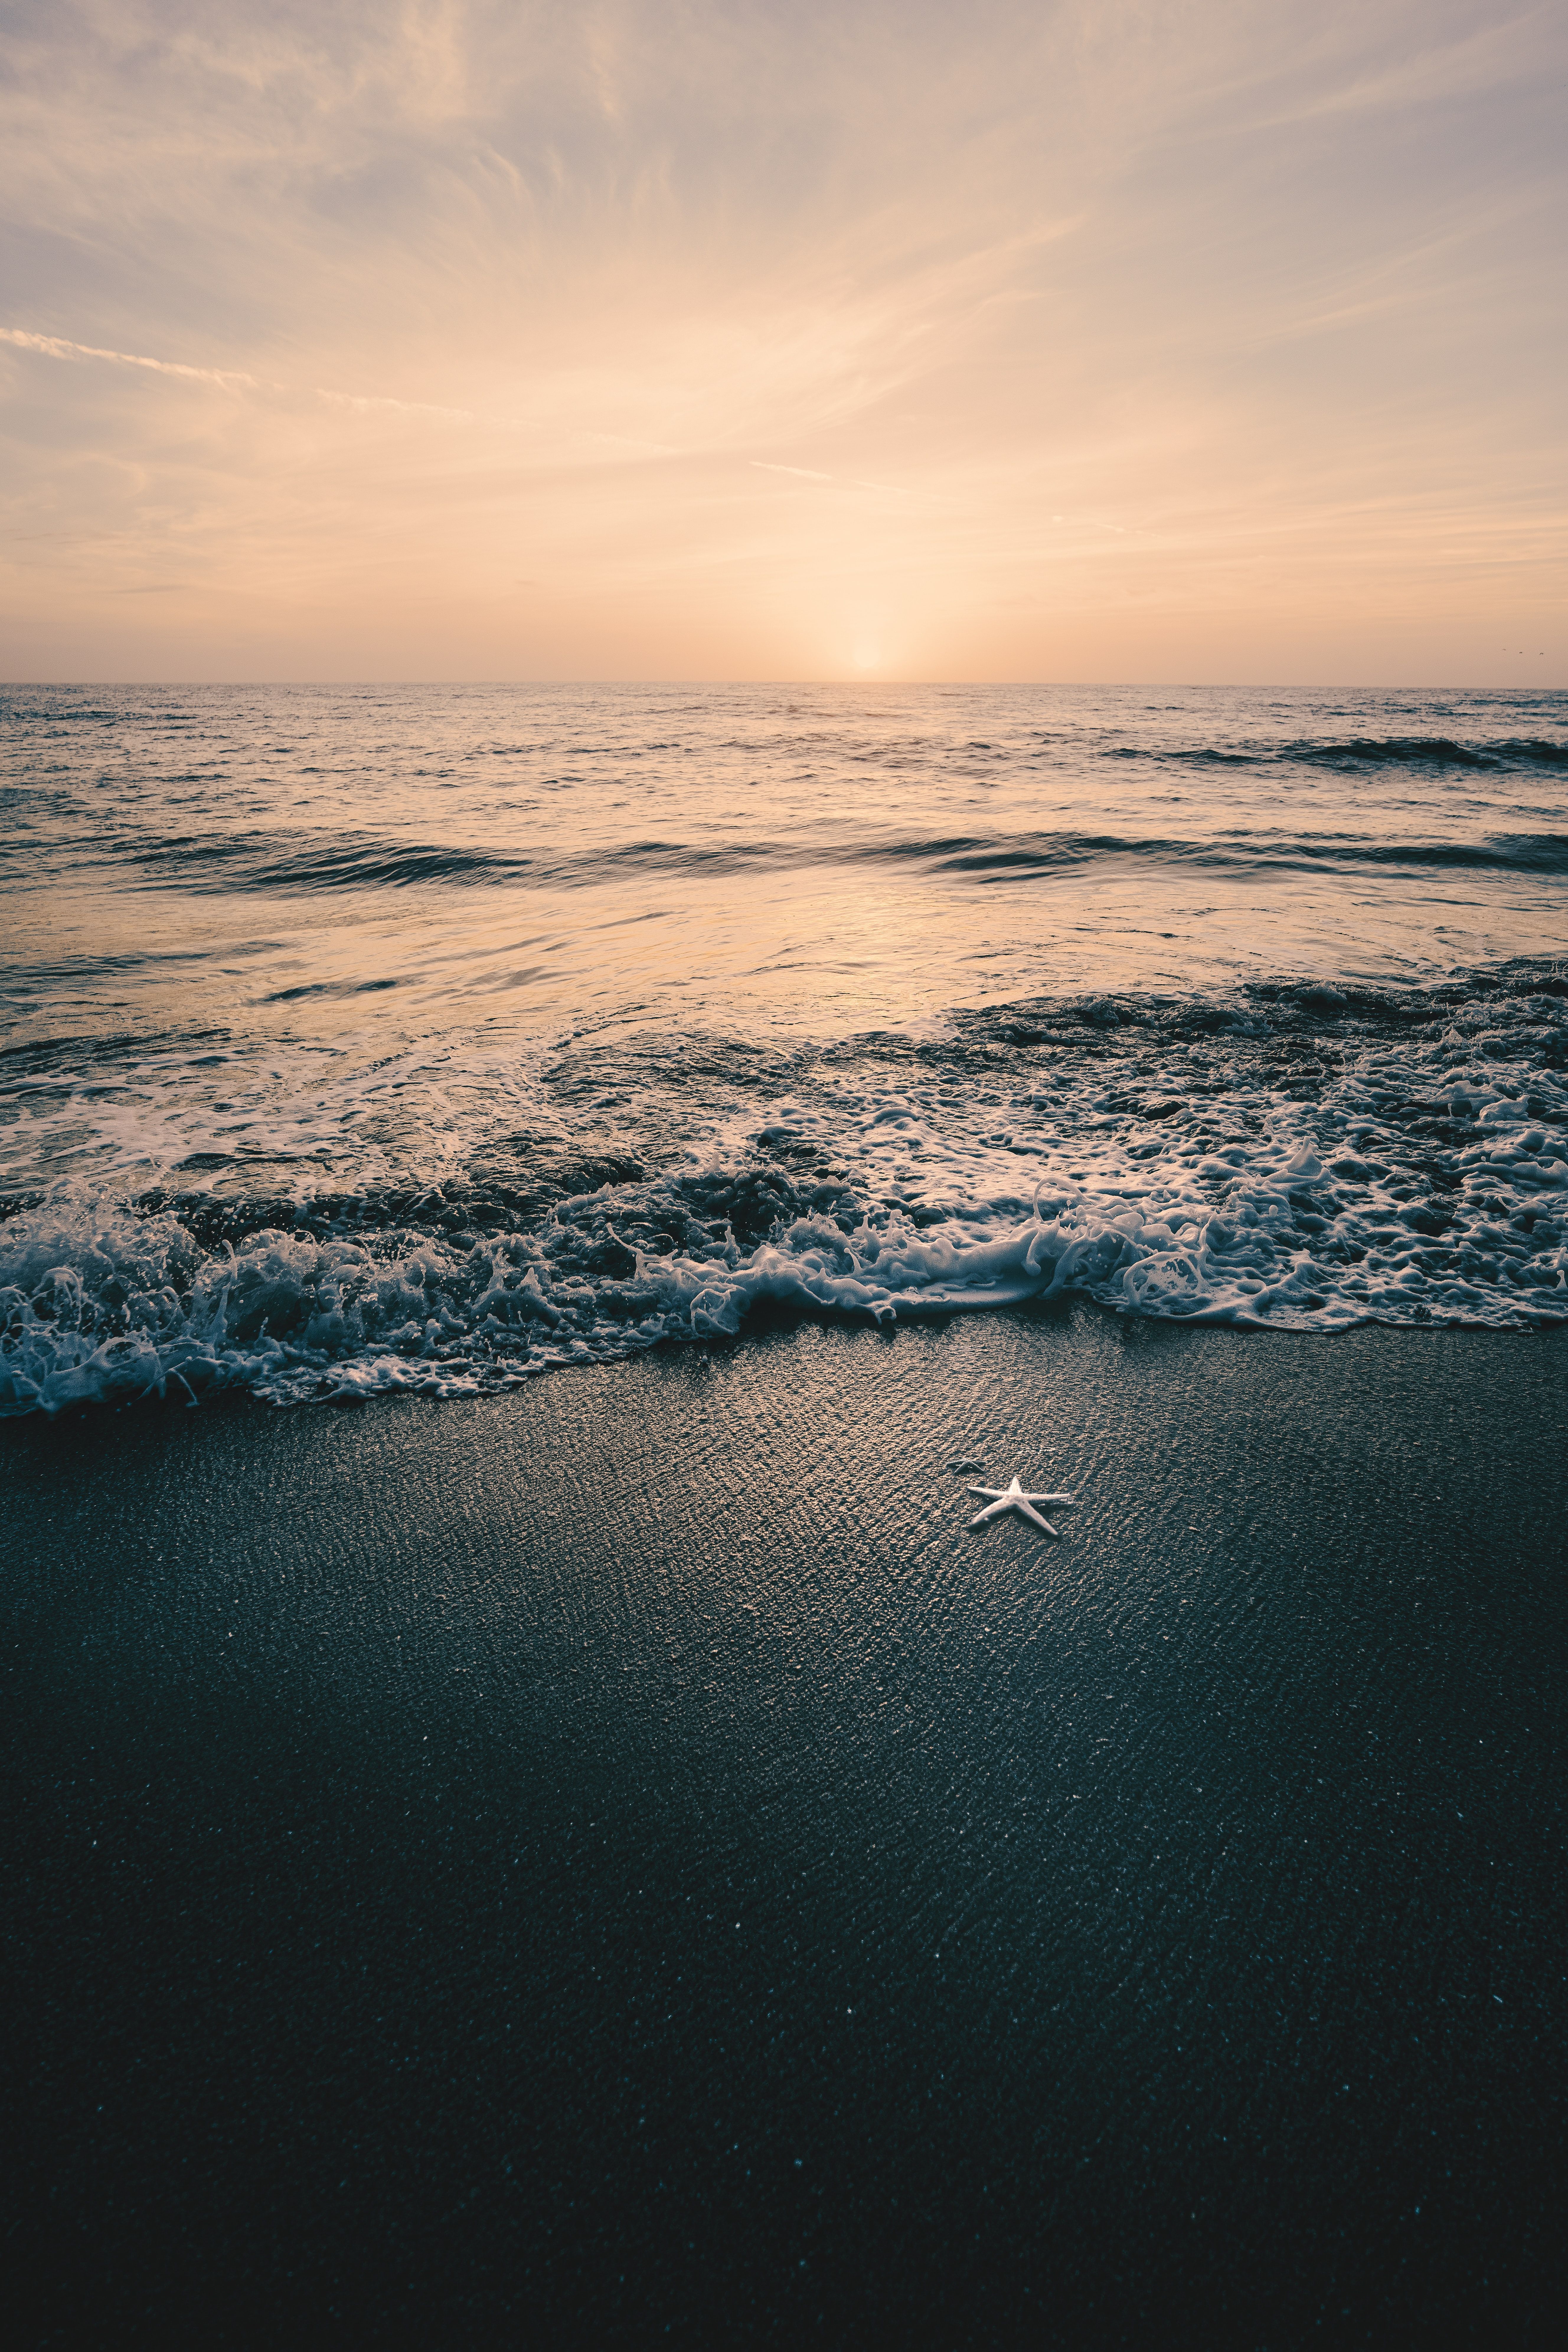 A starfish sits on the shore of a beach as the sun sets - Beach